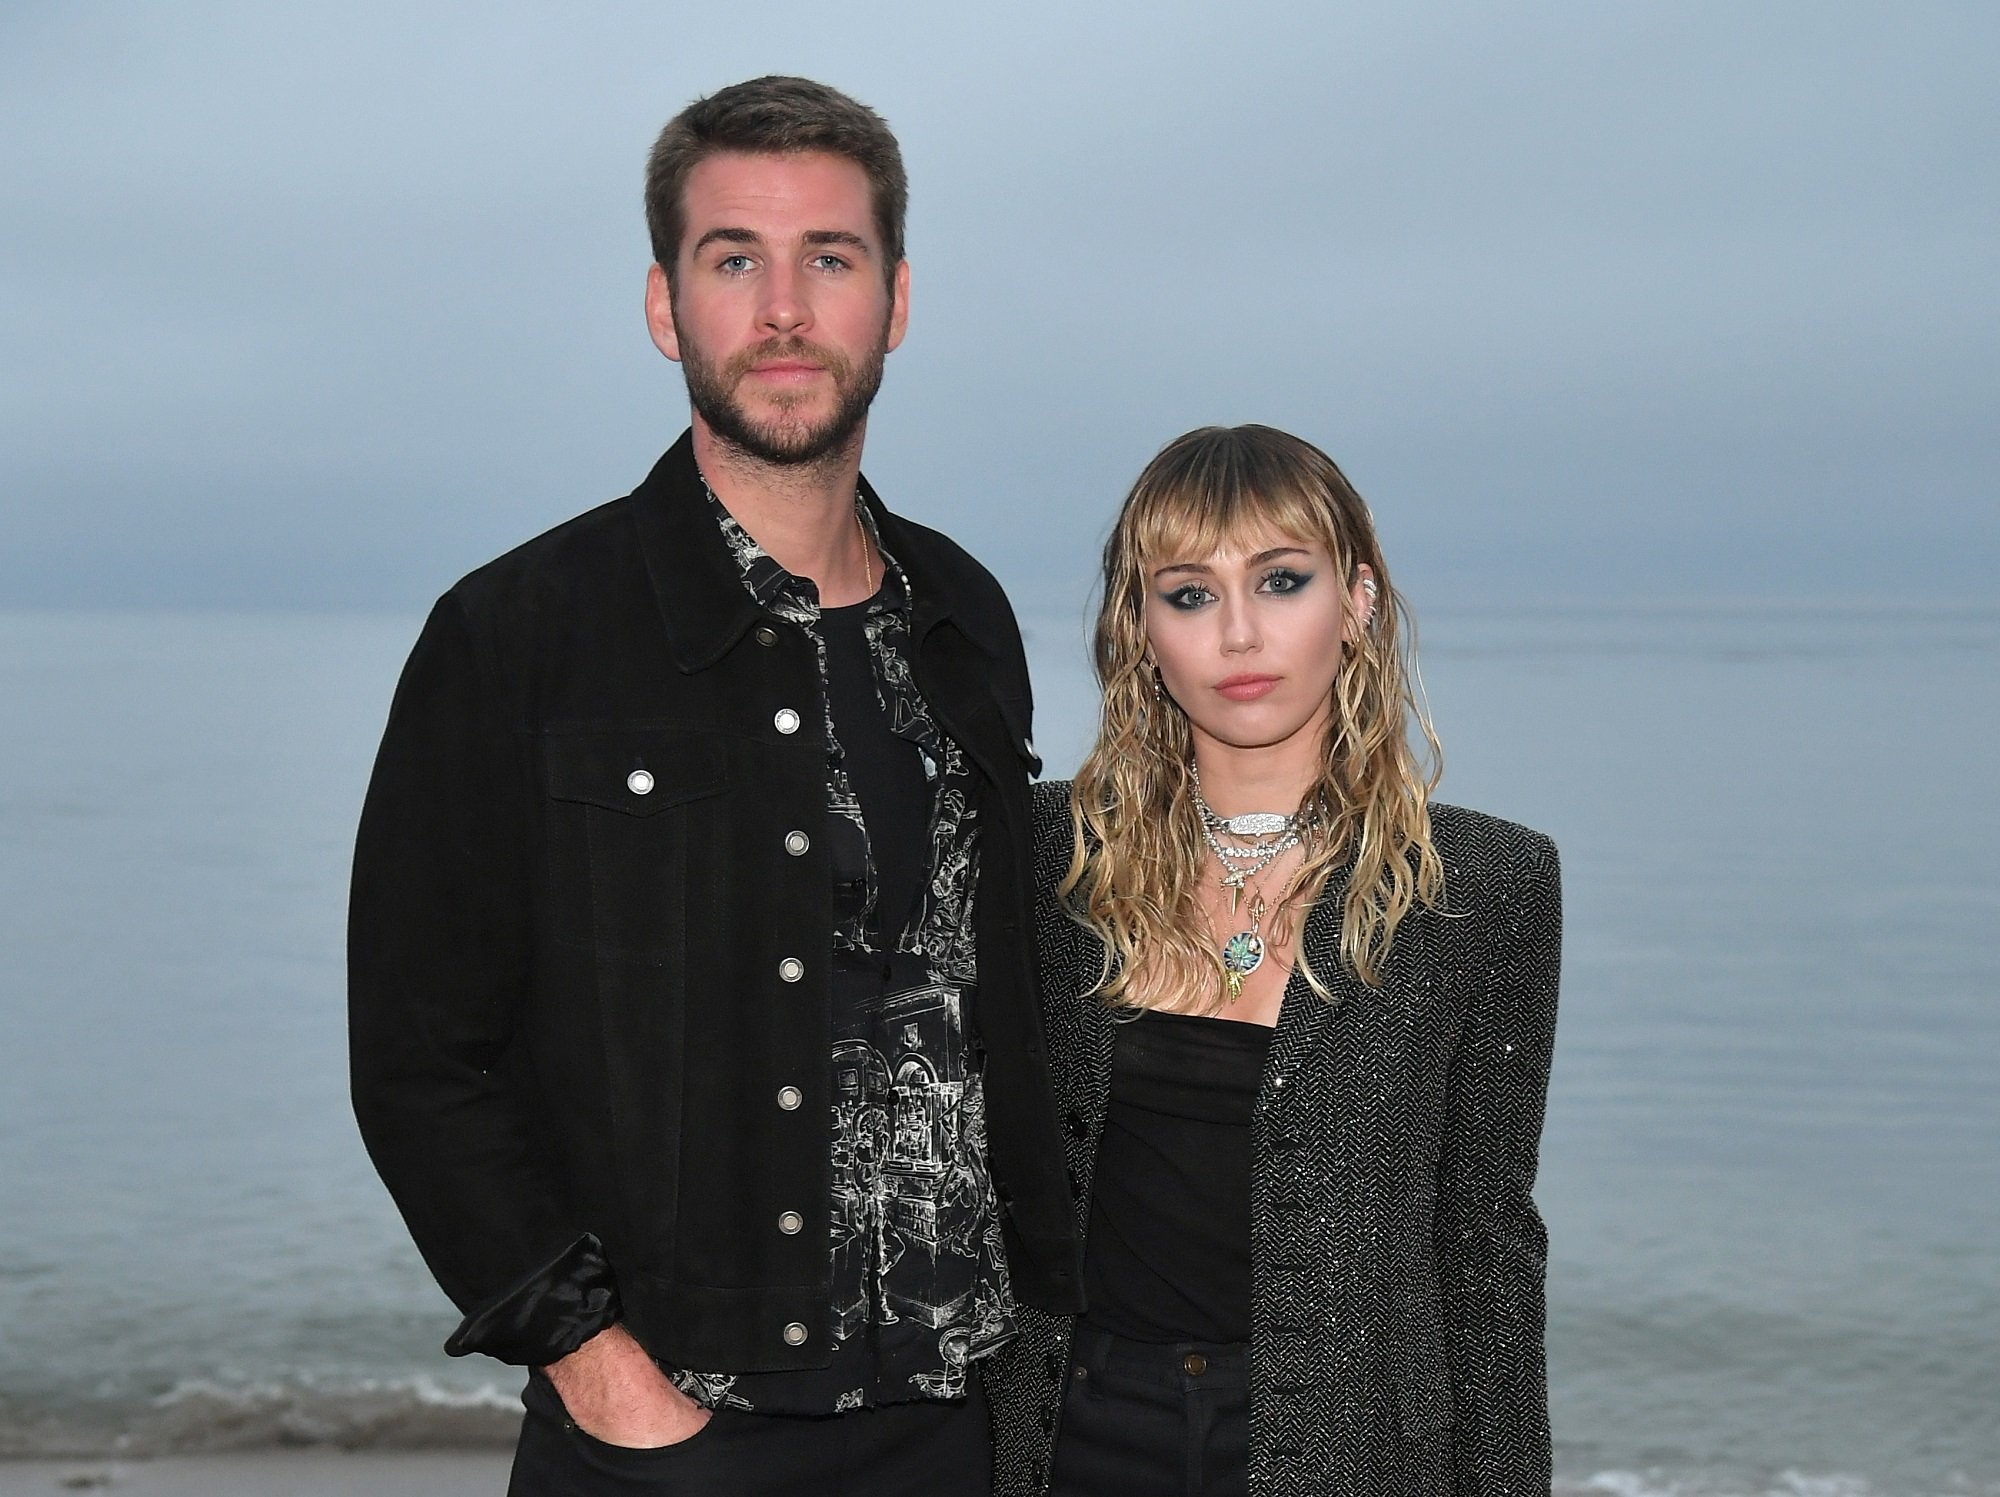 (L-R) Liam Hemsworth and Miley Cyrus attend the Saint Laurent Mens Spring Summer 20 Show Photo Call on June 06, 2019 in Malibu, California.